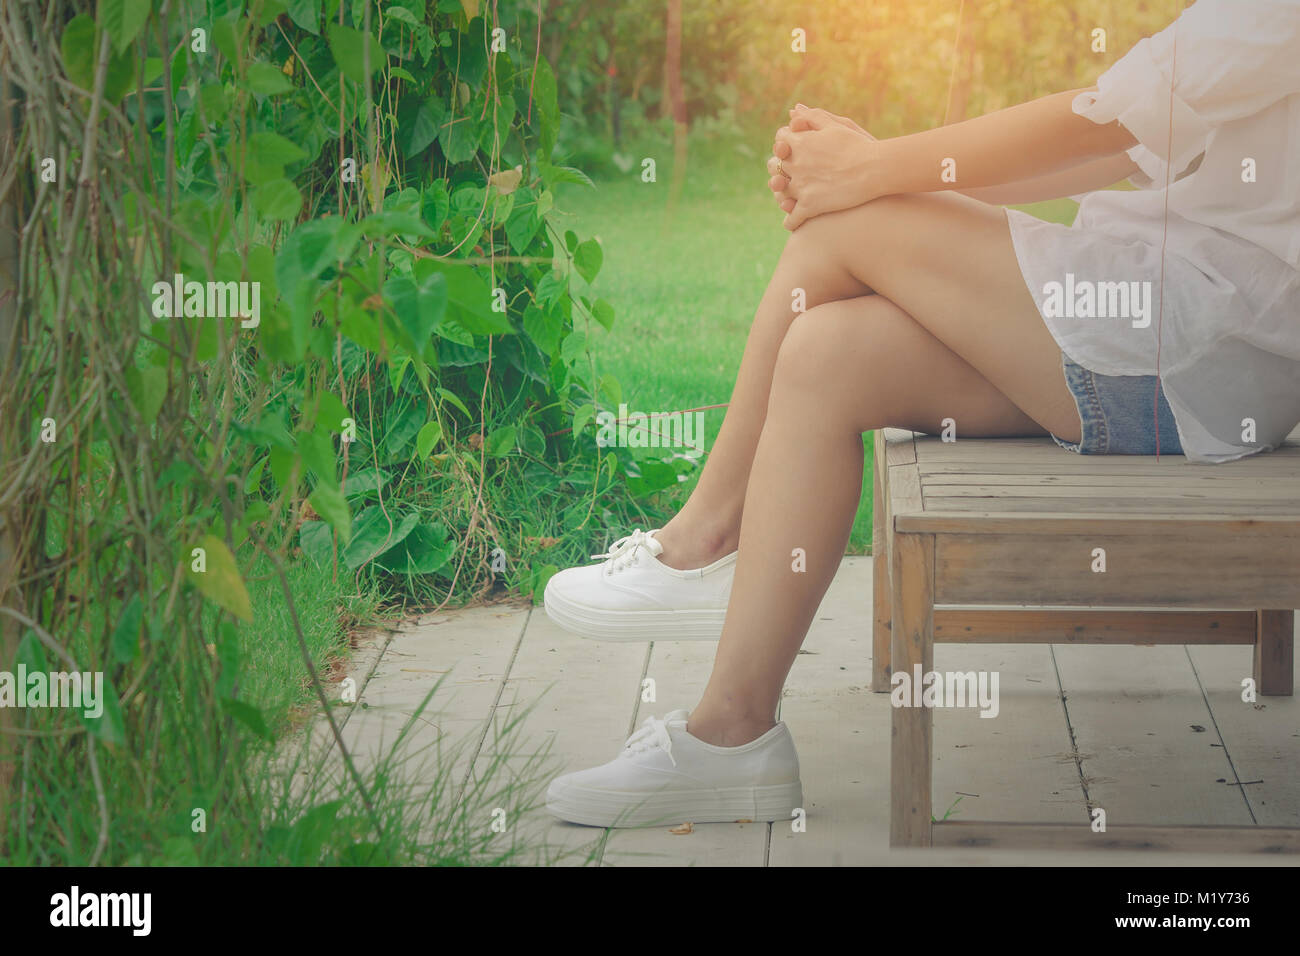 Relaxation Concept : Woman wear white shirt and short jean, her relaxing on wooden chair at outdoor garden surrounded with green natural background. Stock Photo